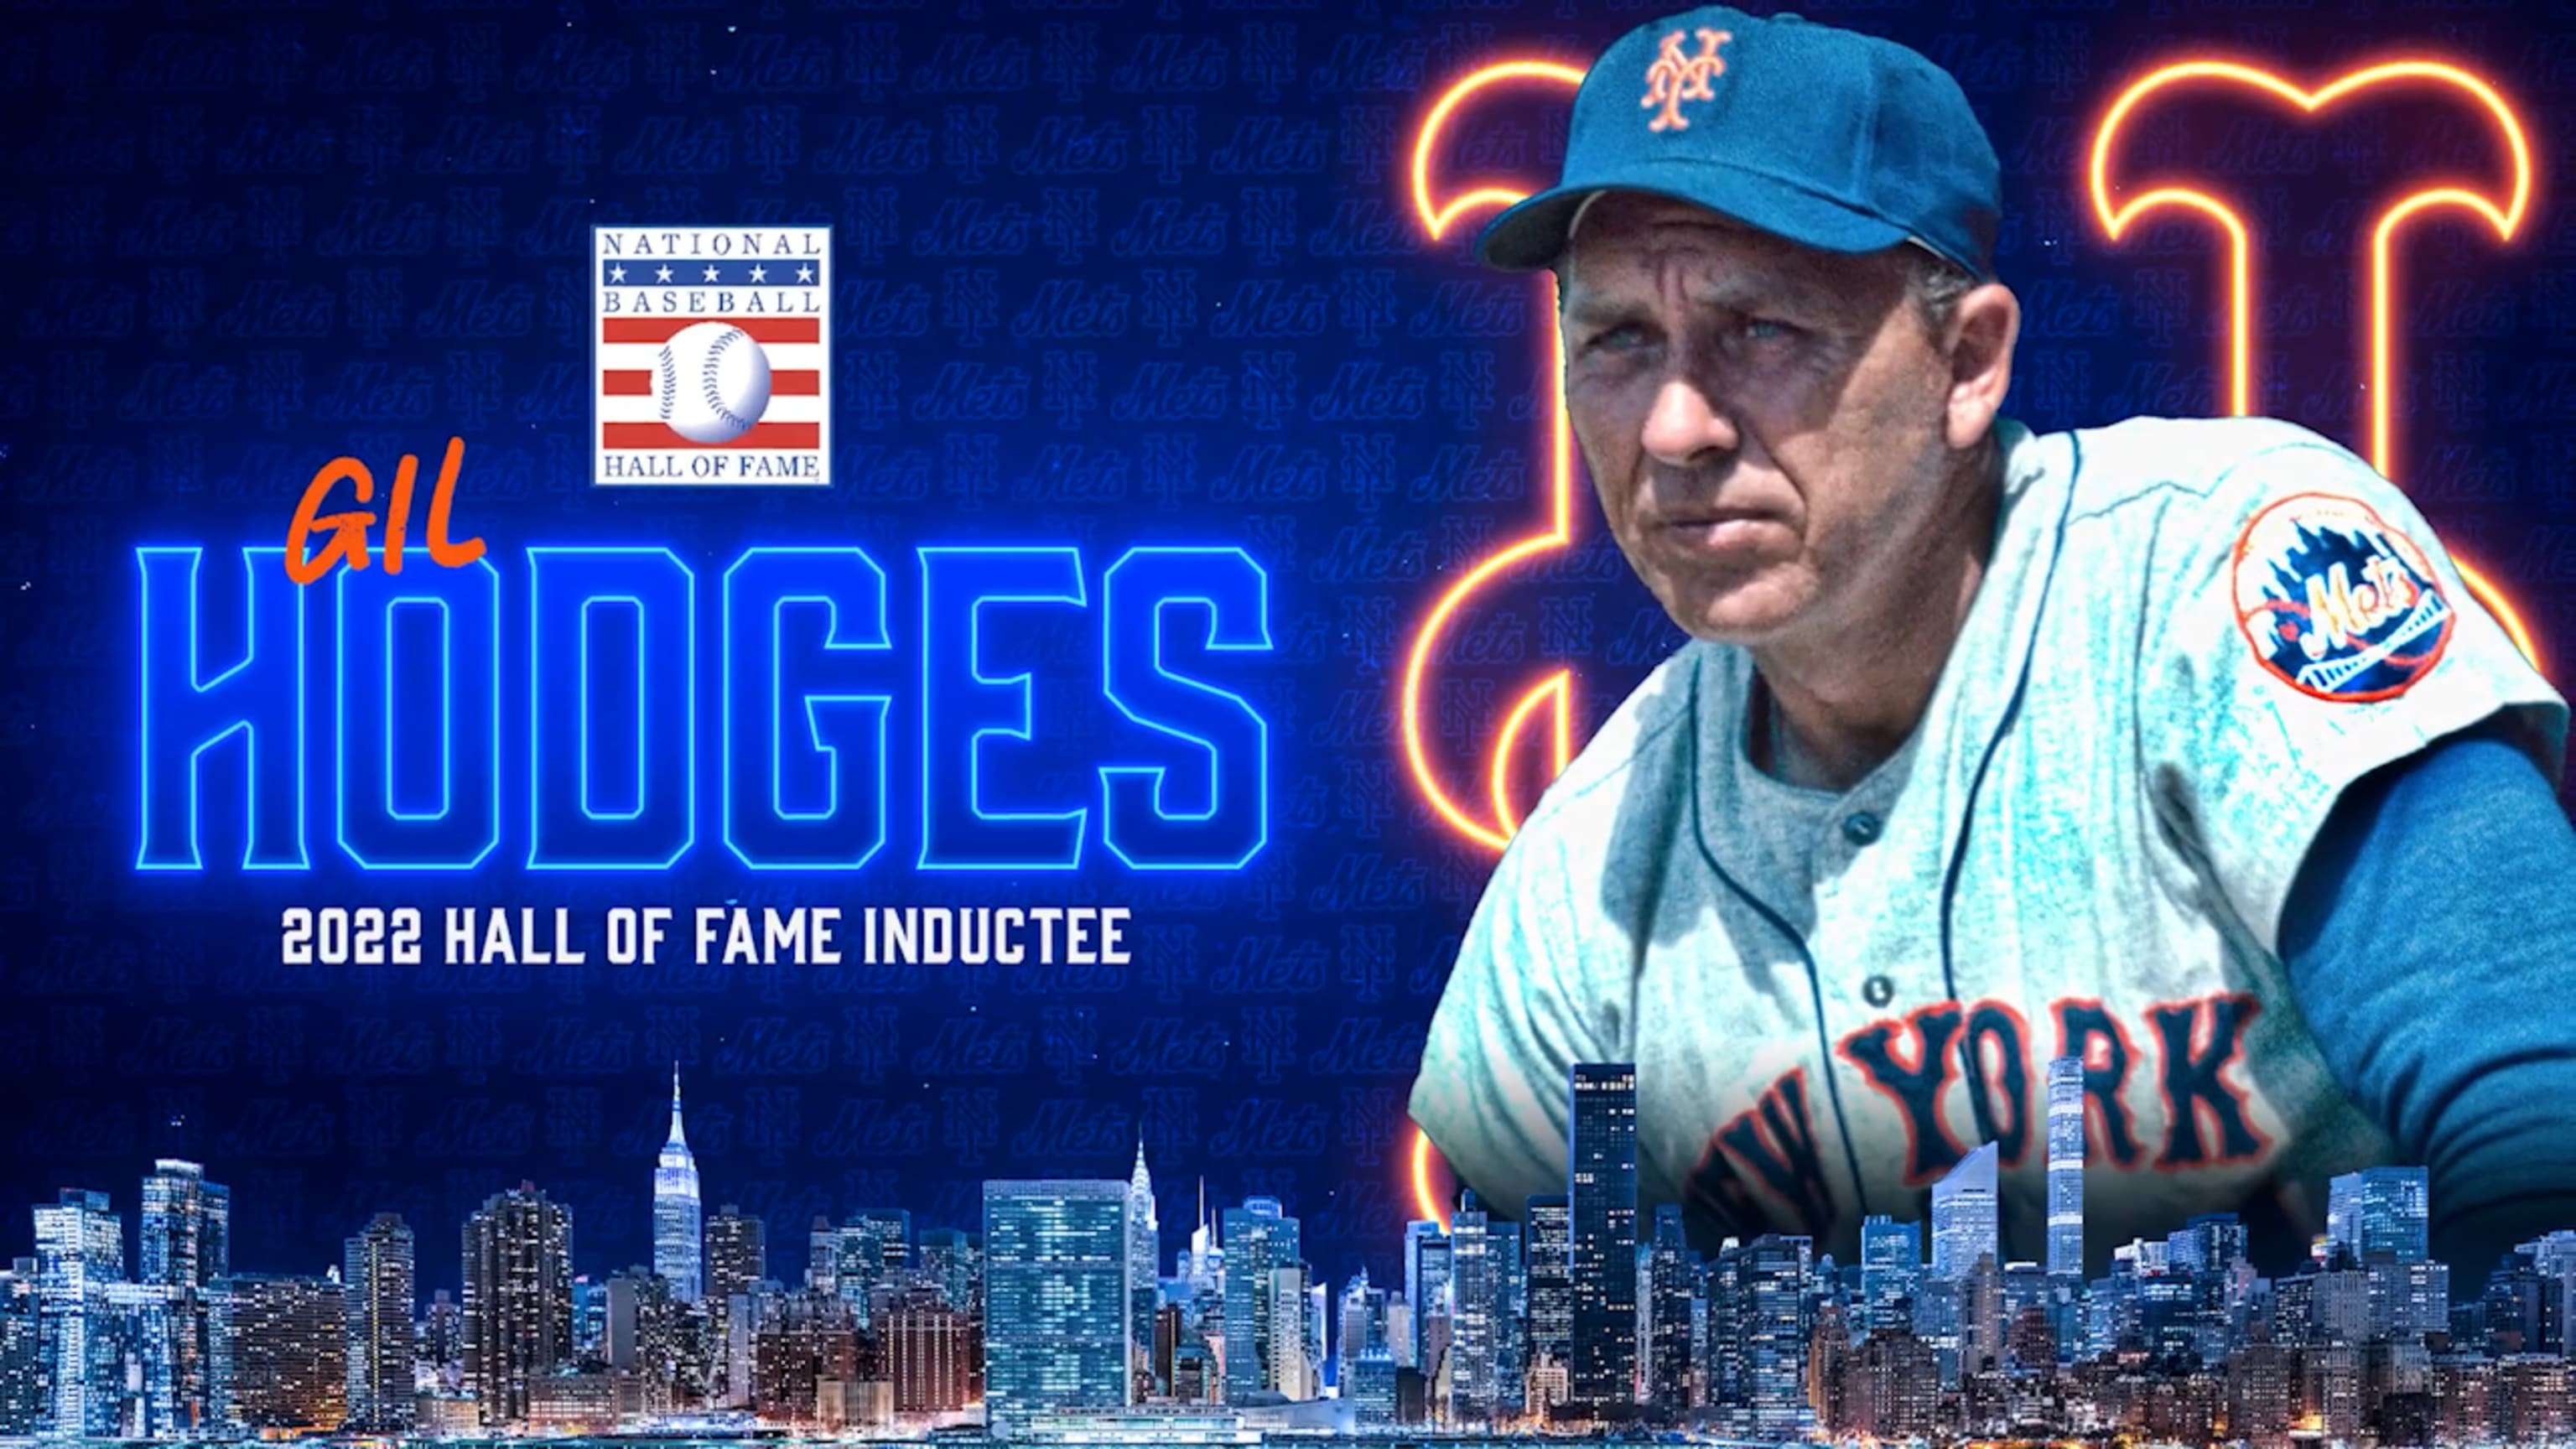 Long Overdue: Gil Hodges Finally in The HOF